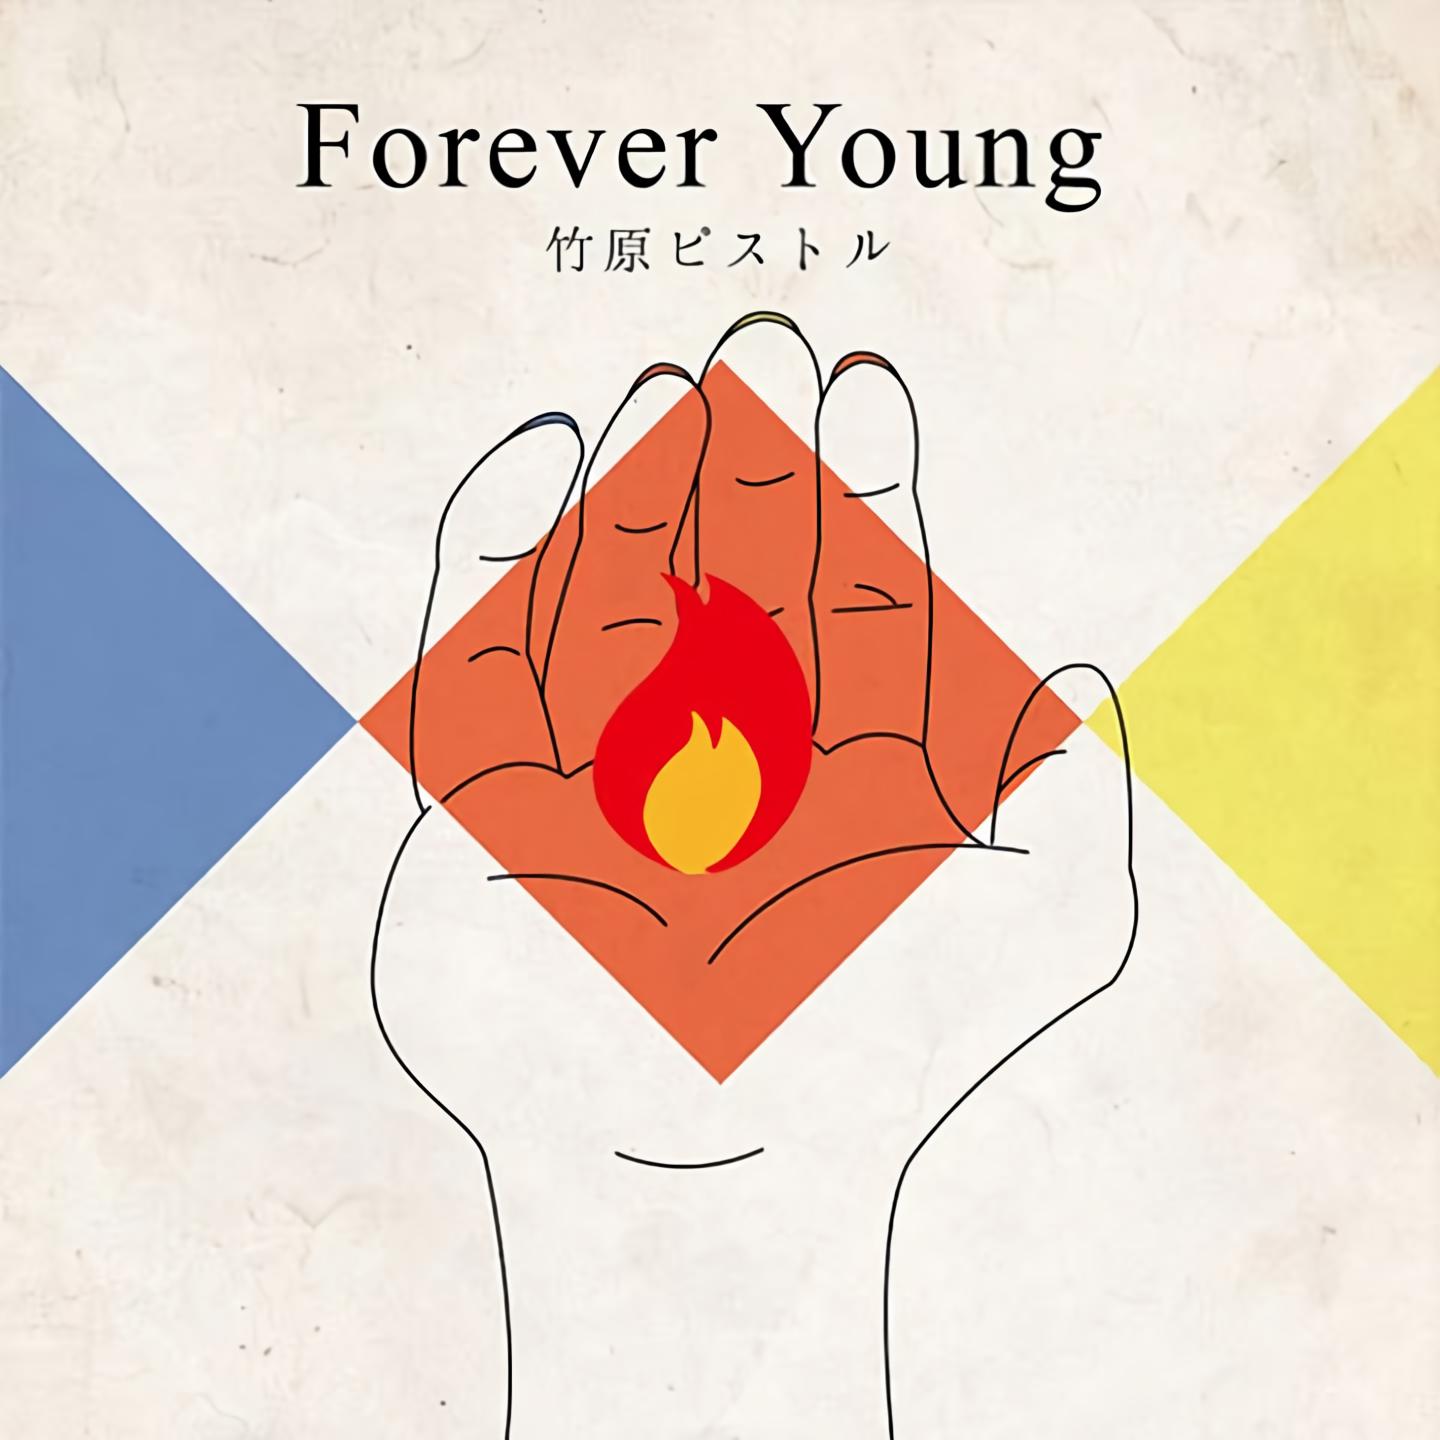 Young 竹原ピストル 高音质在线试听 Forever Young歌词 歌曲下载 酷狗音乐forever